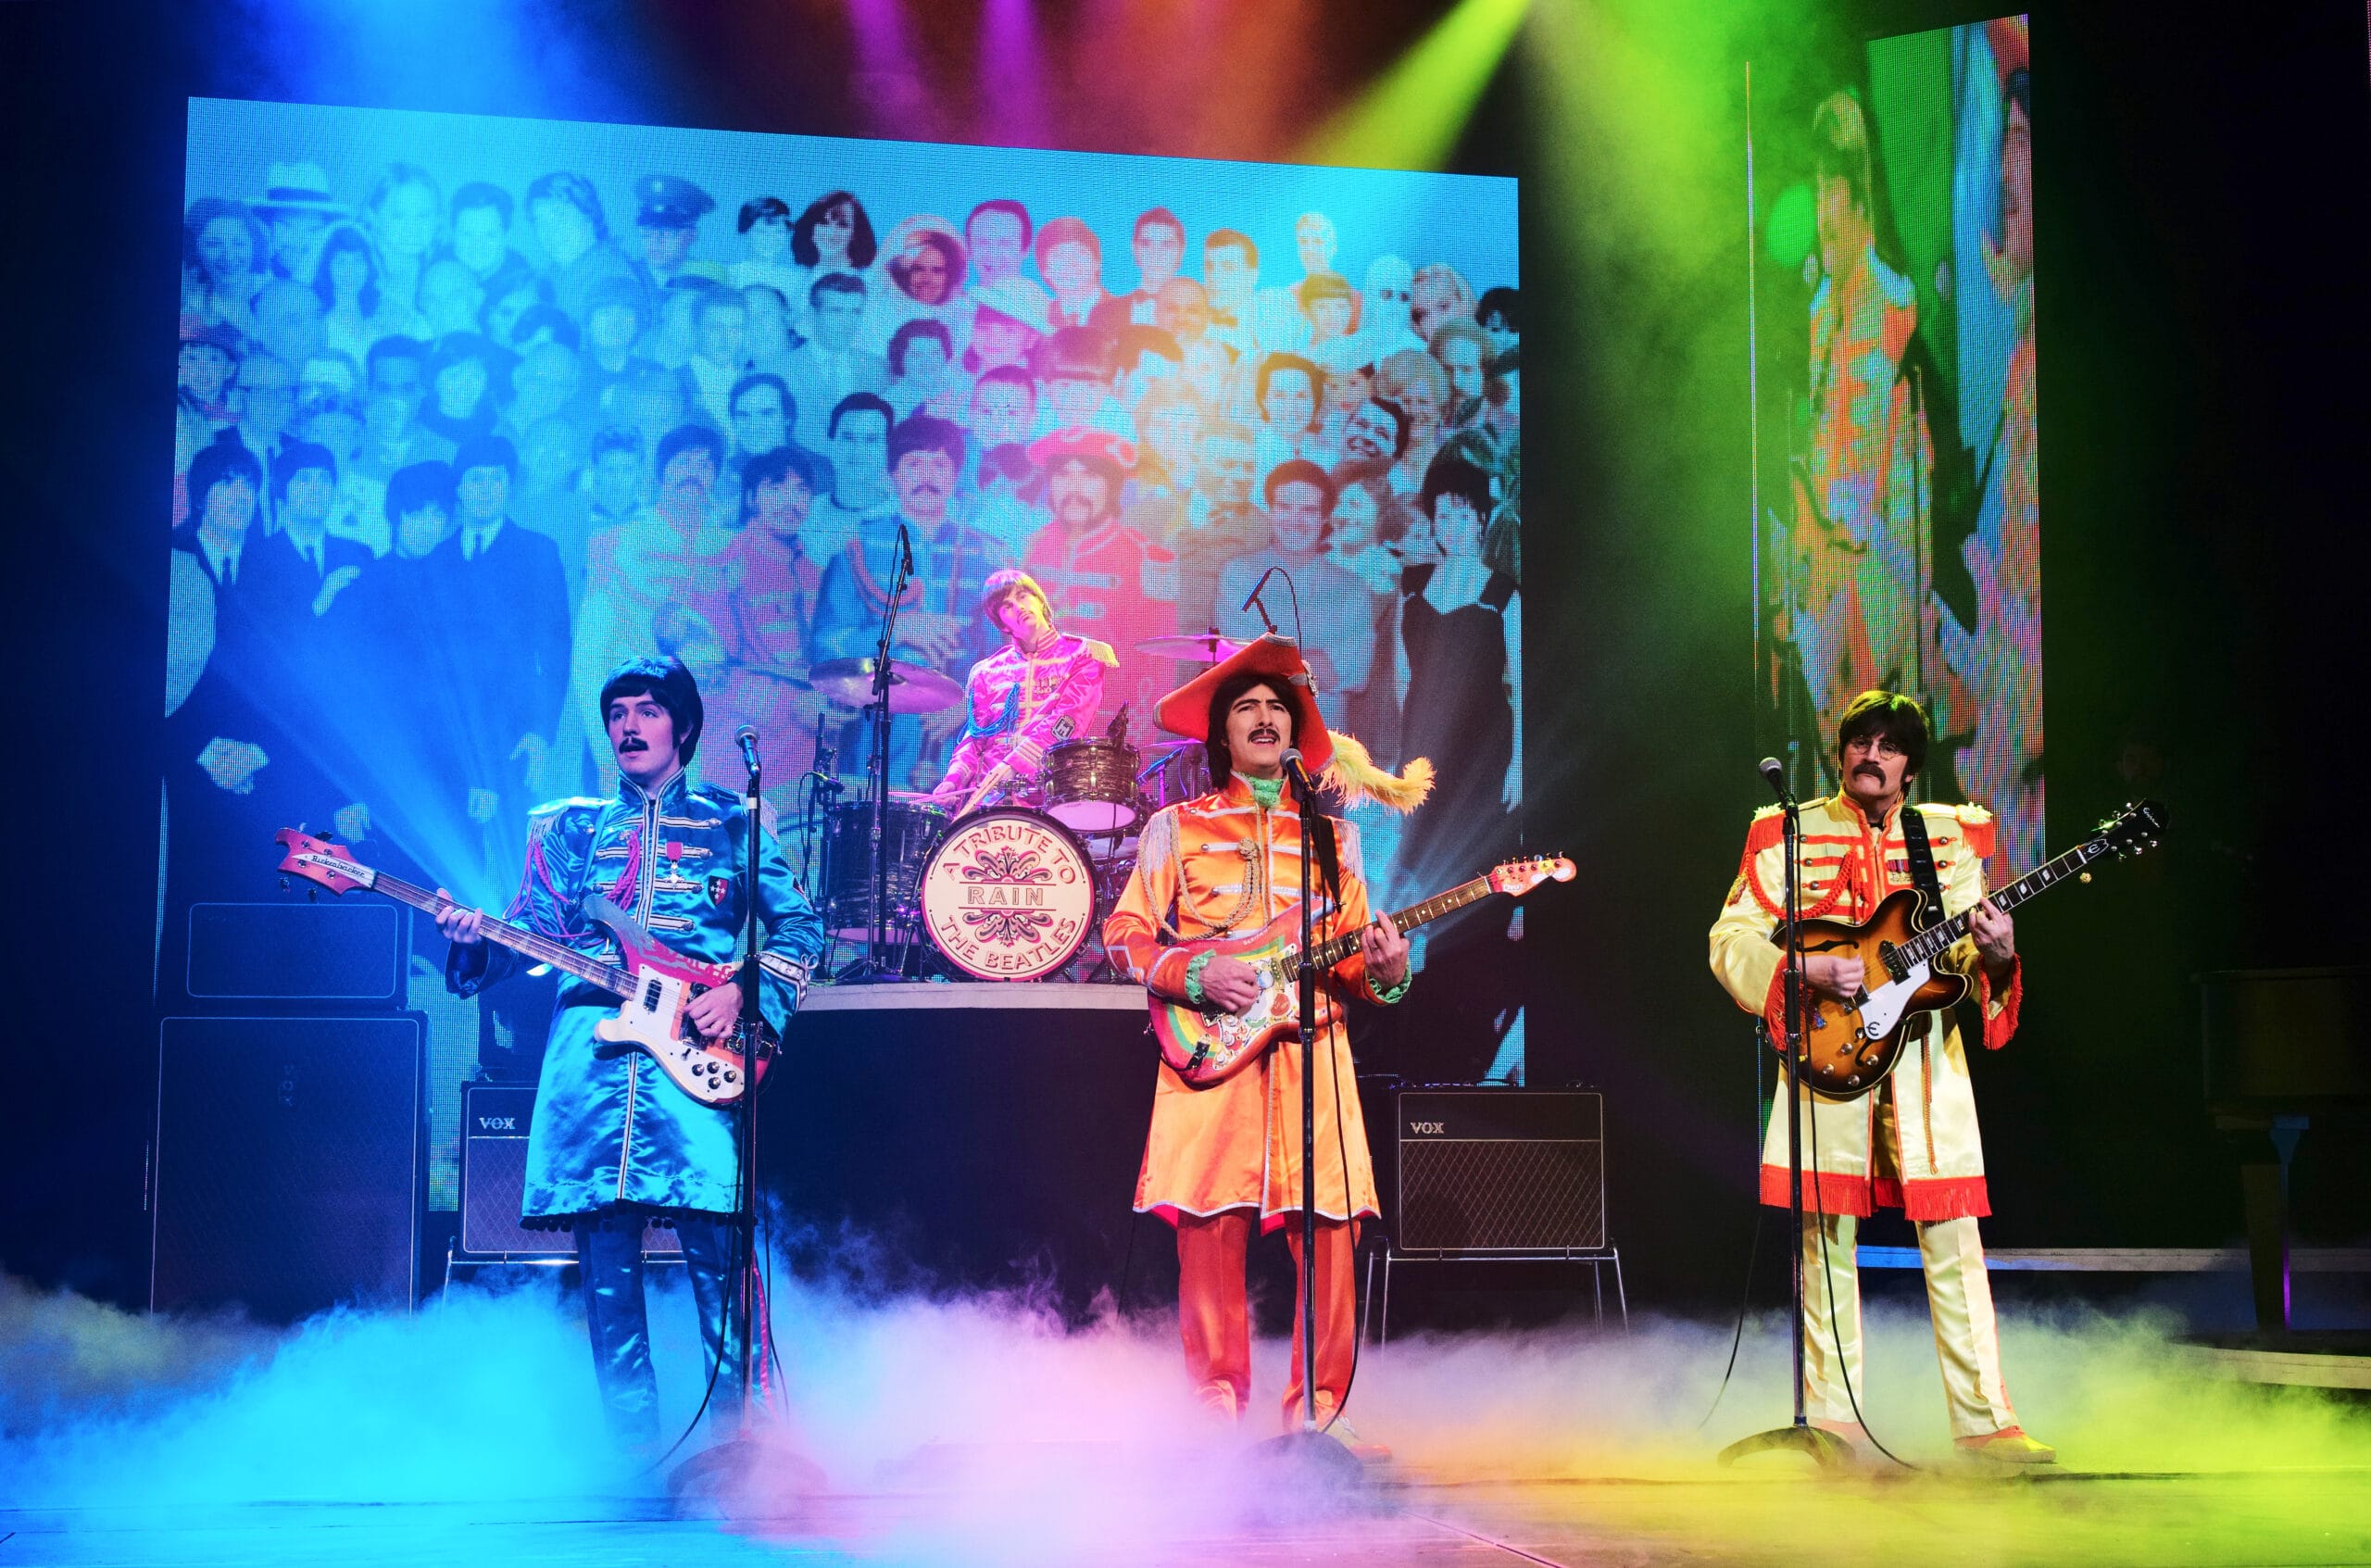 Rain - A Tribute to the Beatles live on stage